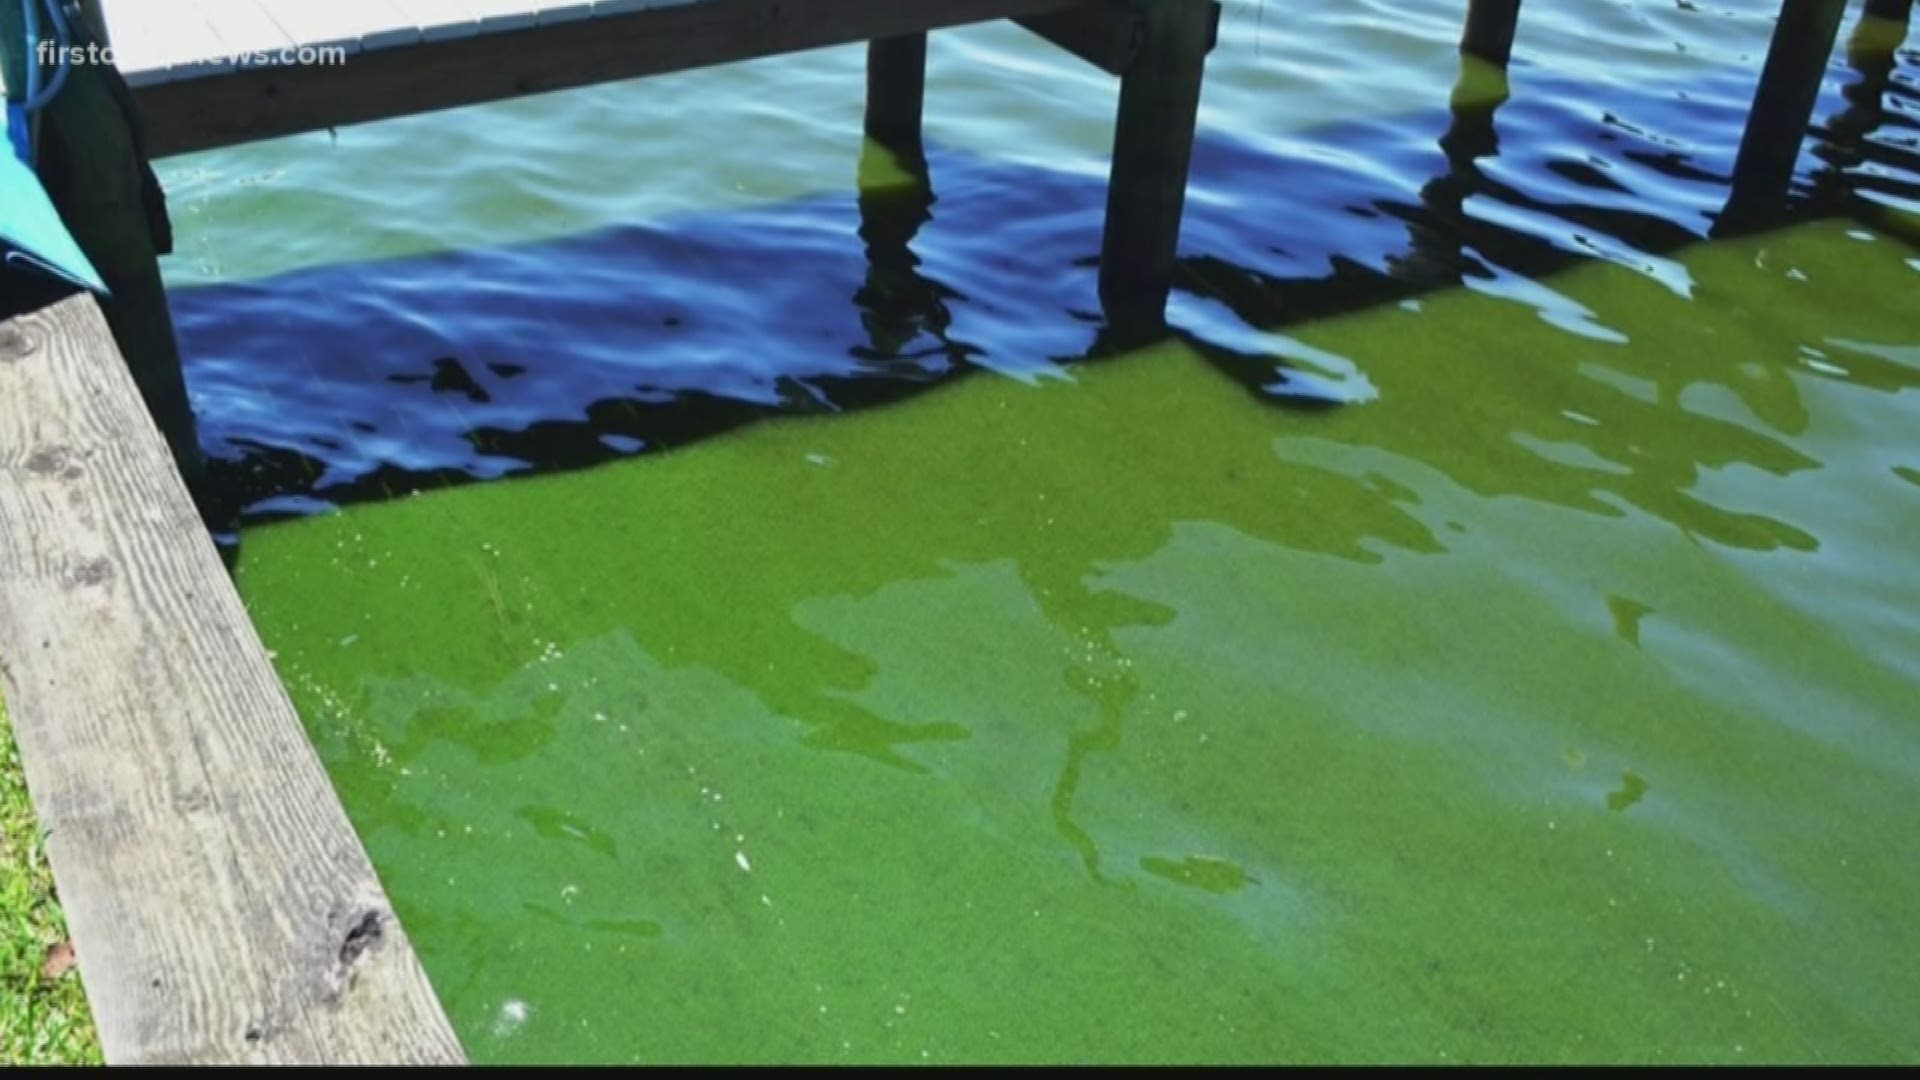 Experts say that while it's important to keep an eye on the algae bloom, its also important not to go into a panic. For now, the fishing tournament is expected to go on as scheduled.